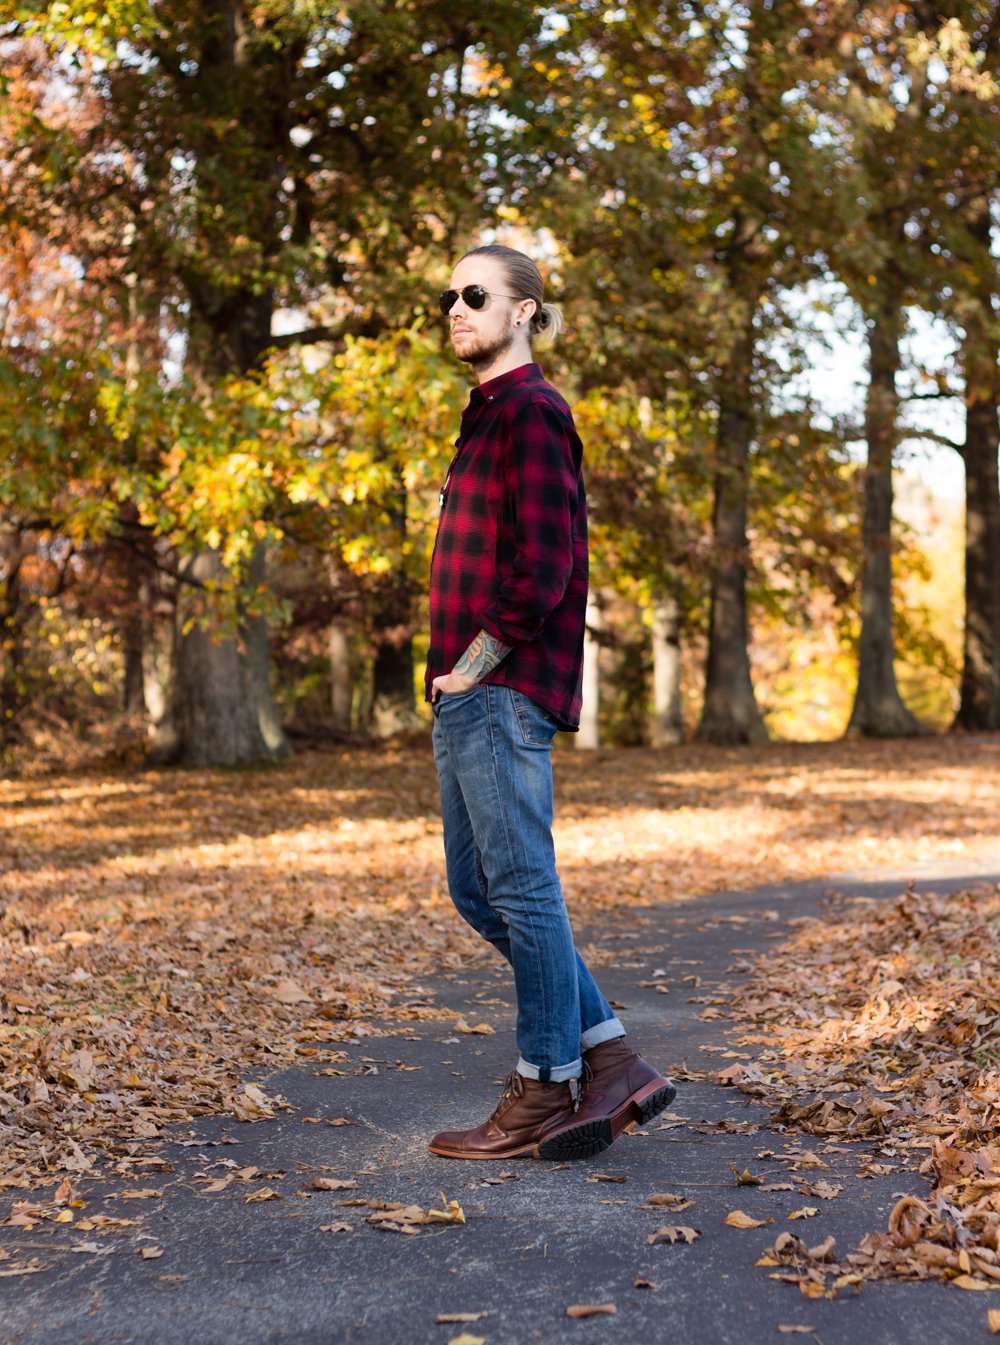 The Kentucky Gent, a Louisville, Kentucky blogger, wearing Ray-Ban Aviator Sunglasses, Miansai Bracelet, Half United Necklace, BDG Ringer Tank Top, Levi's 511 jeans, and Trask Union Shearling Boots